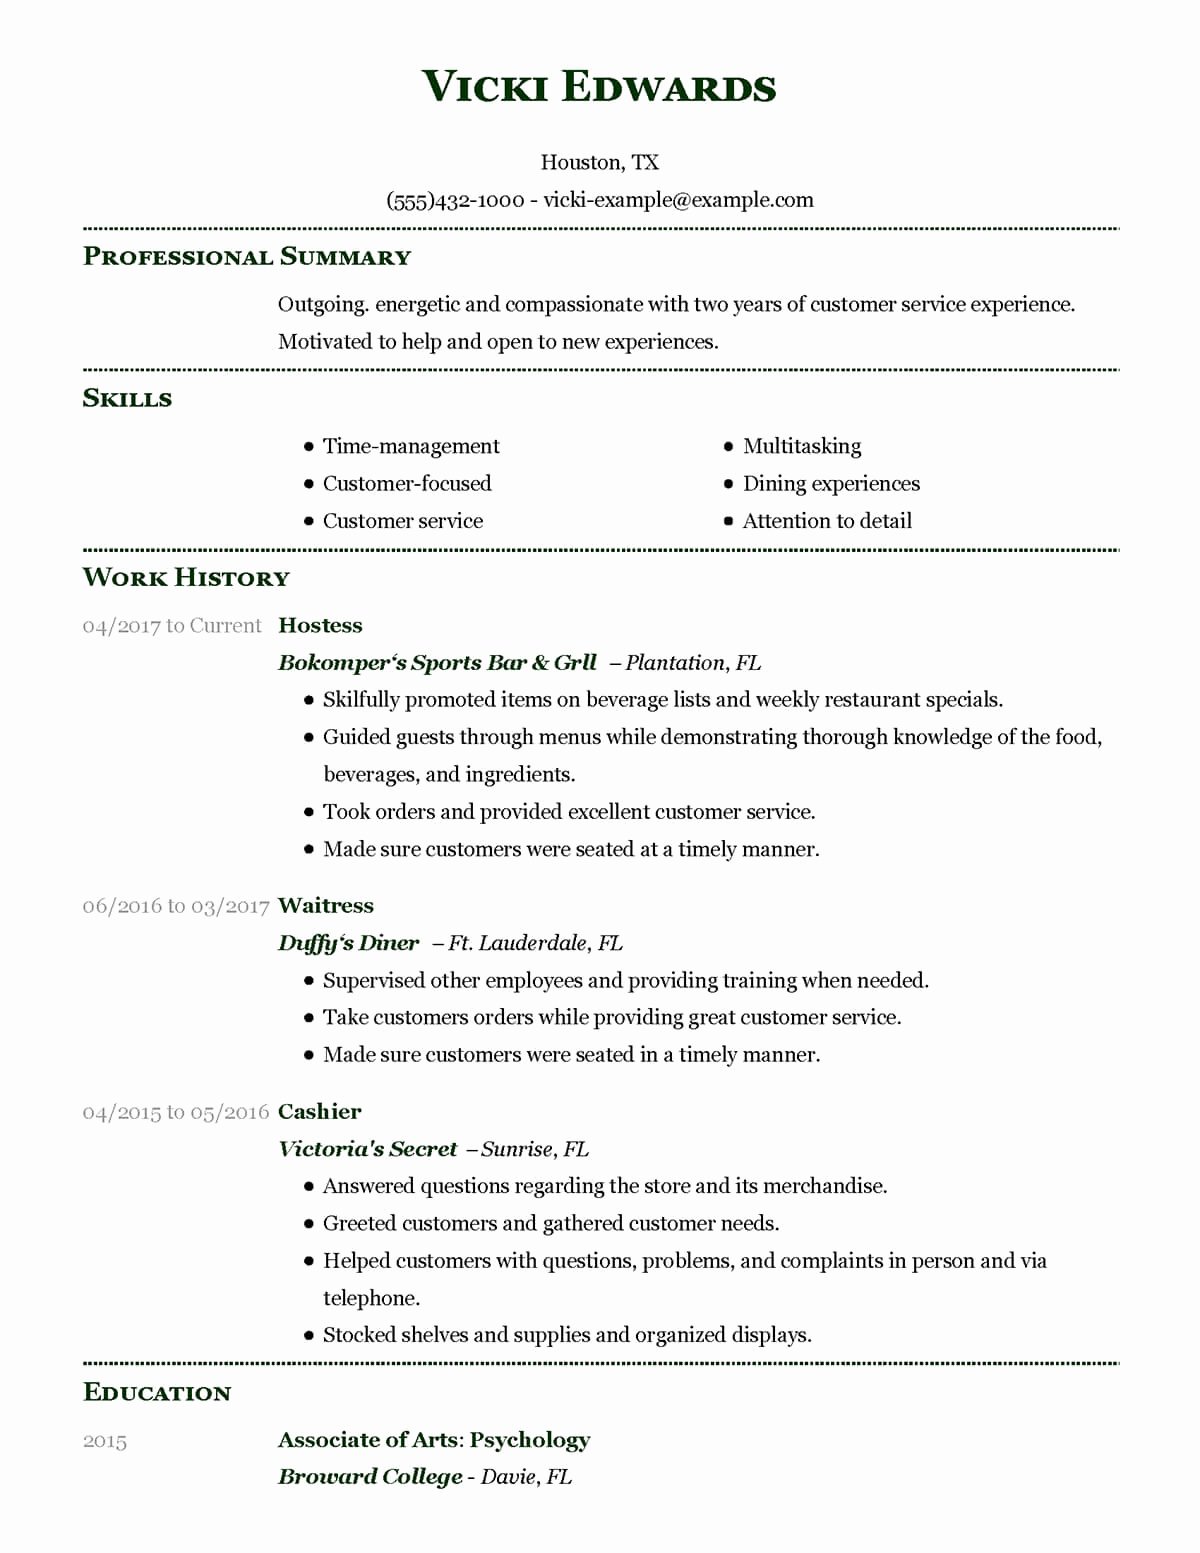 Sample Resume for Waitress Awesome Unfor Table Restaurant Server Resume Examples to Stand